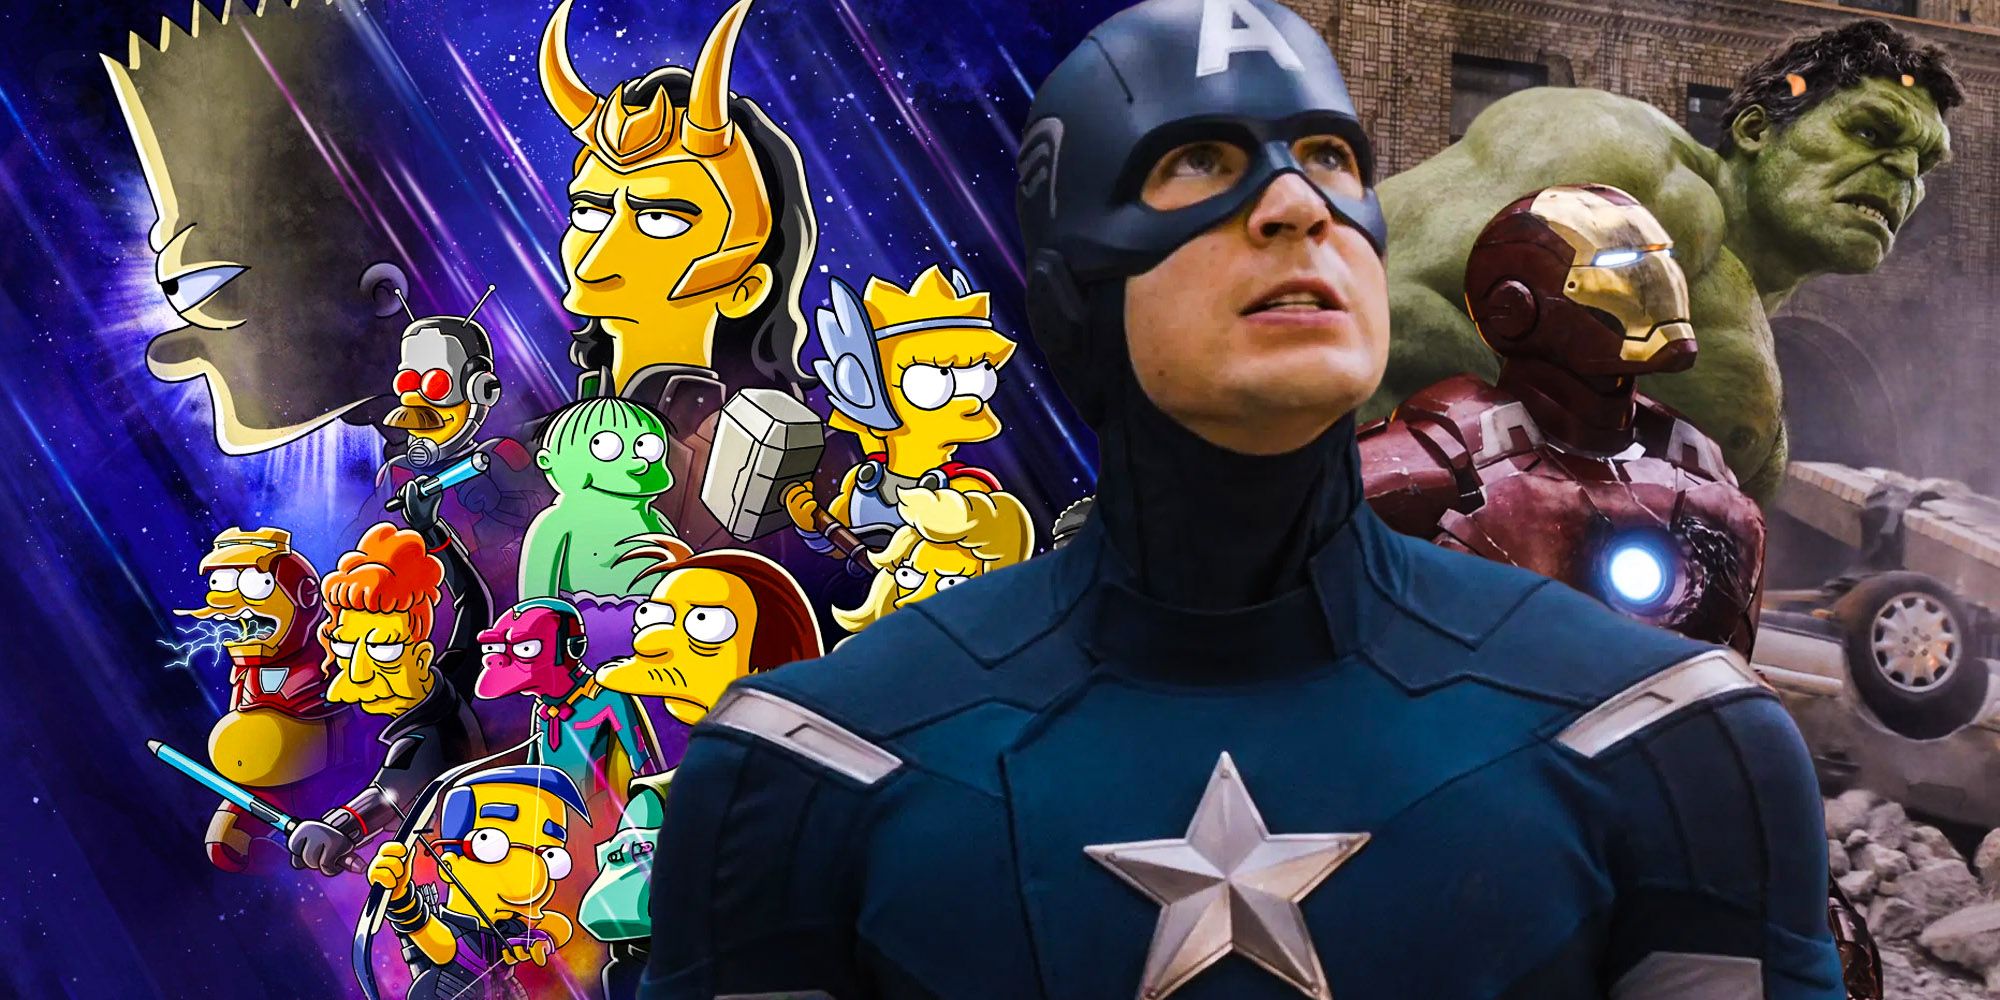 Captain america the avengers the simpsons the good the bart and the loki marvel heroes